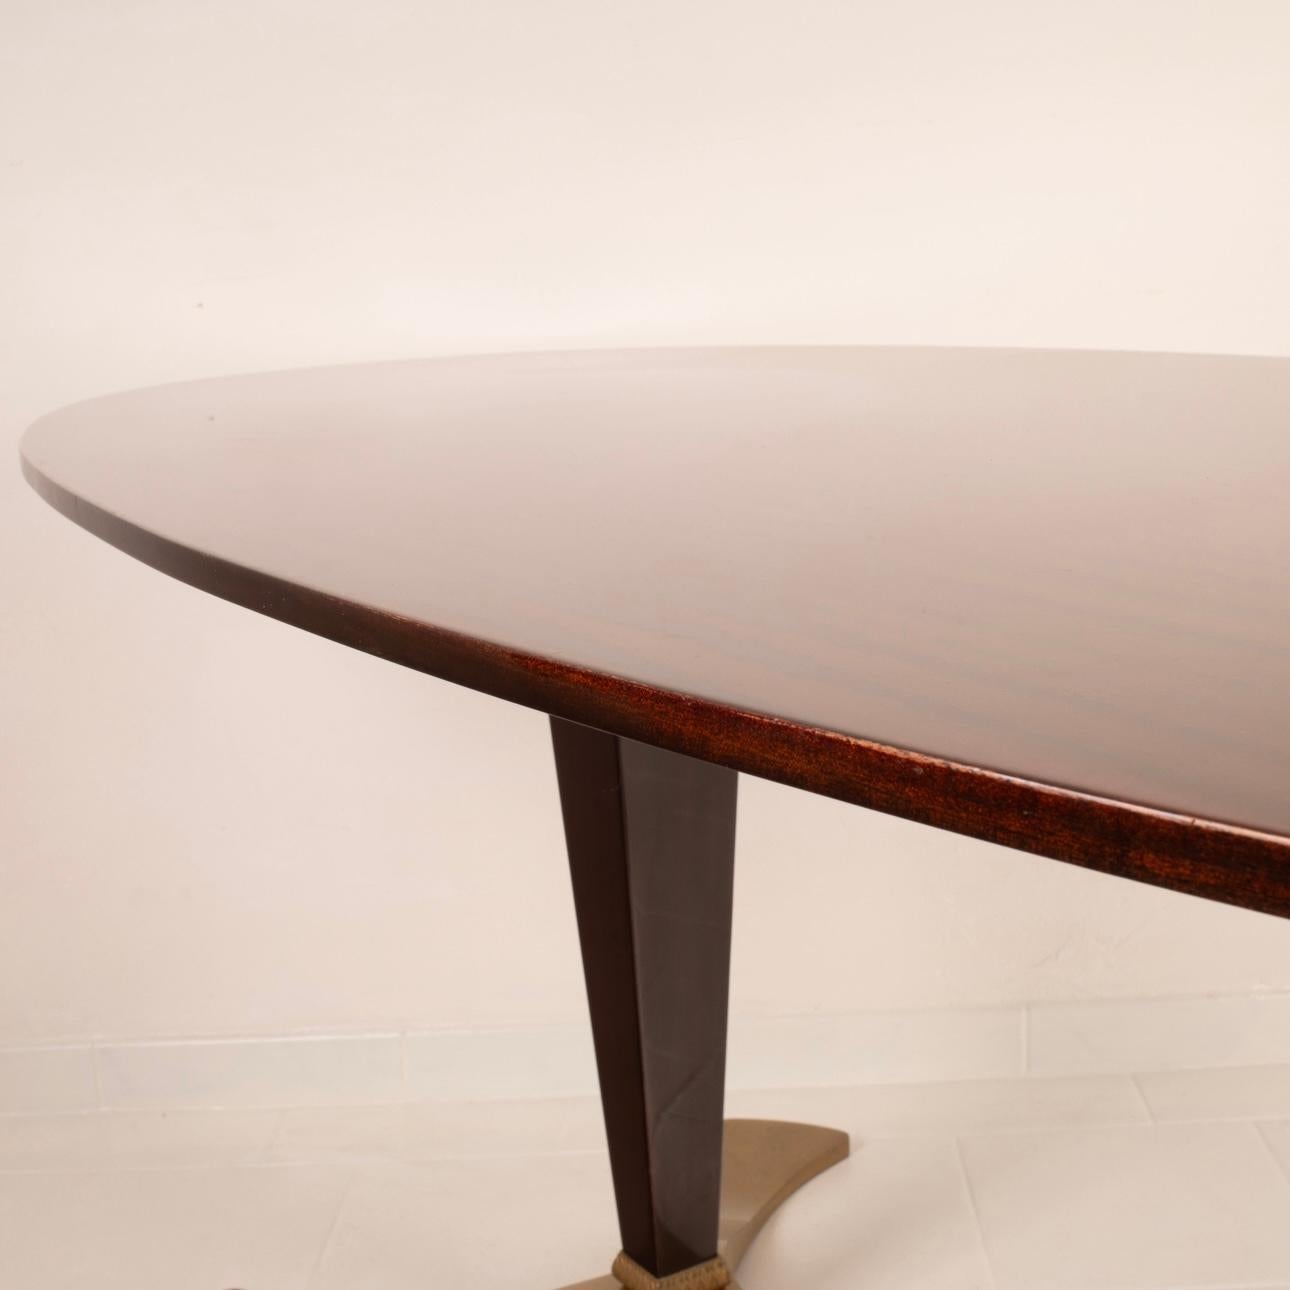 Mid-20th Century Table by Fulvio Brembilla for RB Design 1950's For Sale